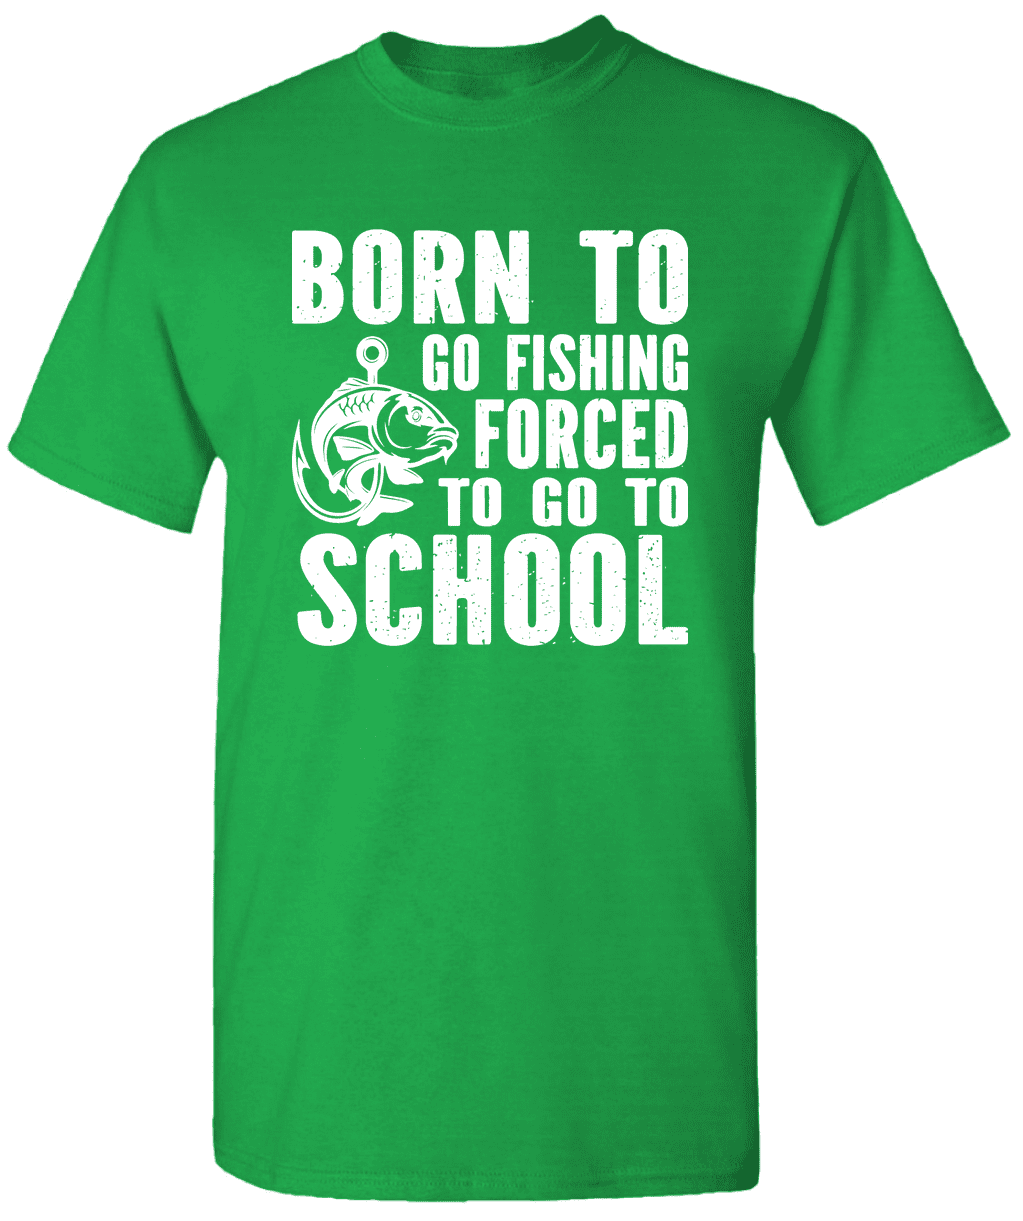 Born To Go Fishing Forced To Go To School - Graphic Fishing T-Shirt 